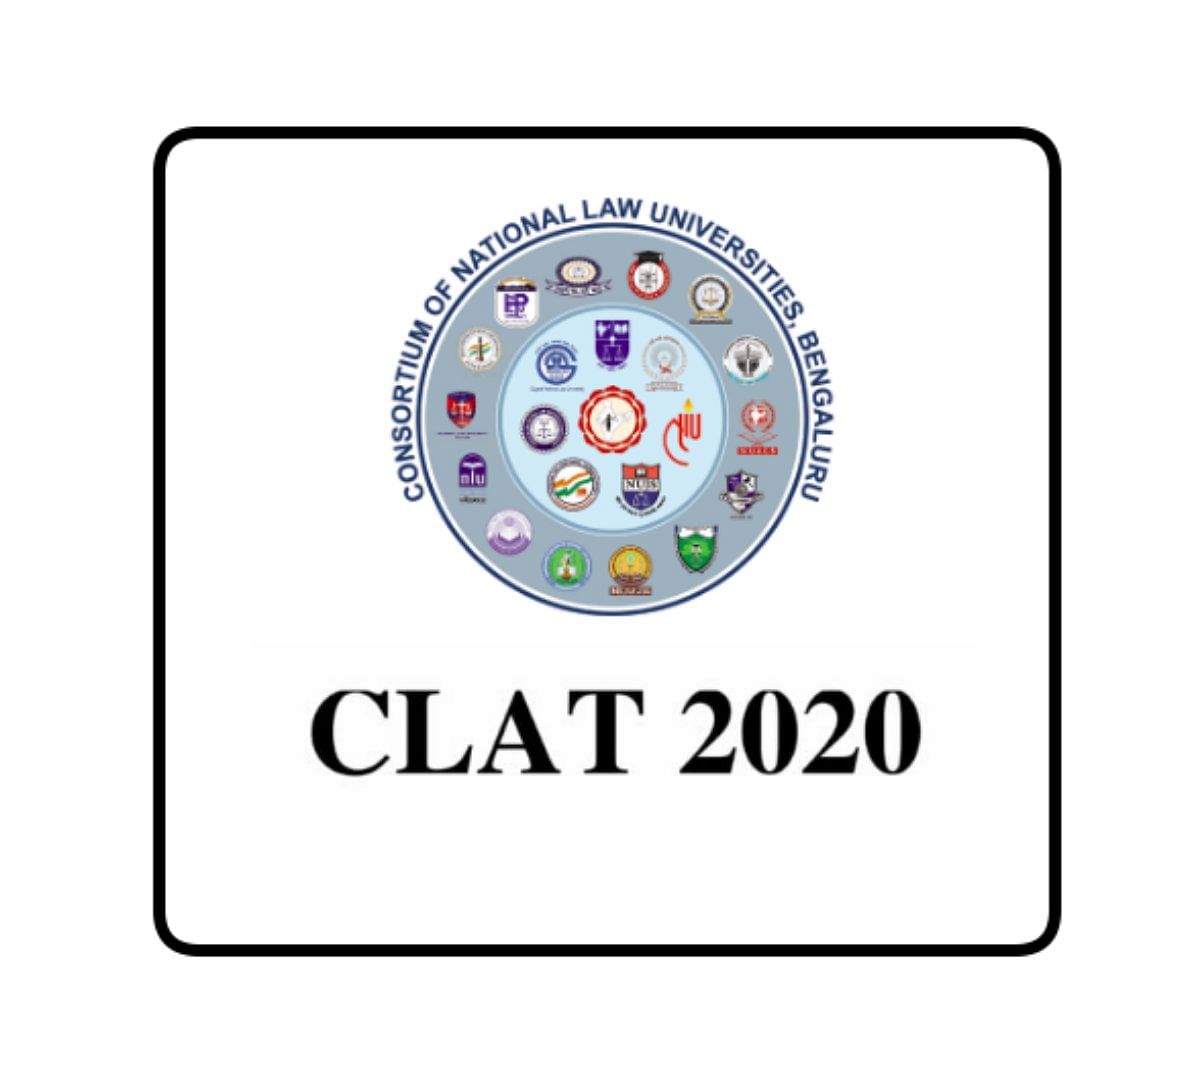 CLAT 2020: Application Process Begins Today, Check Details